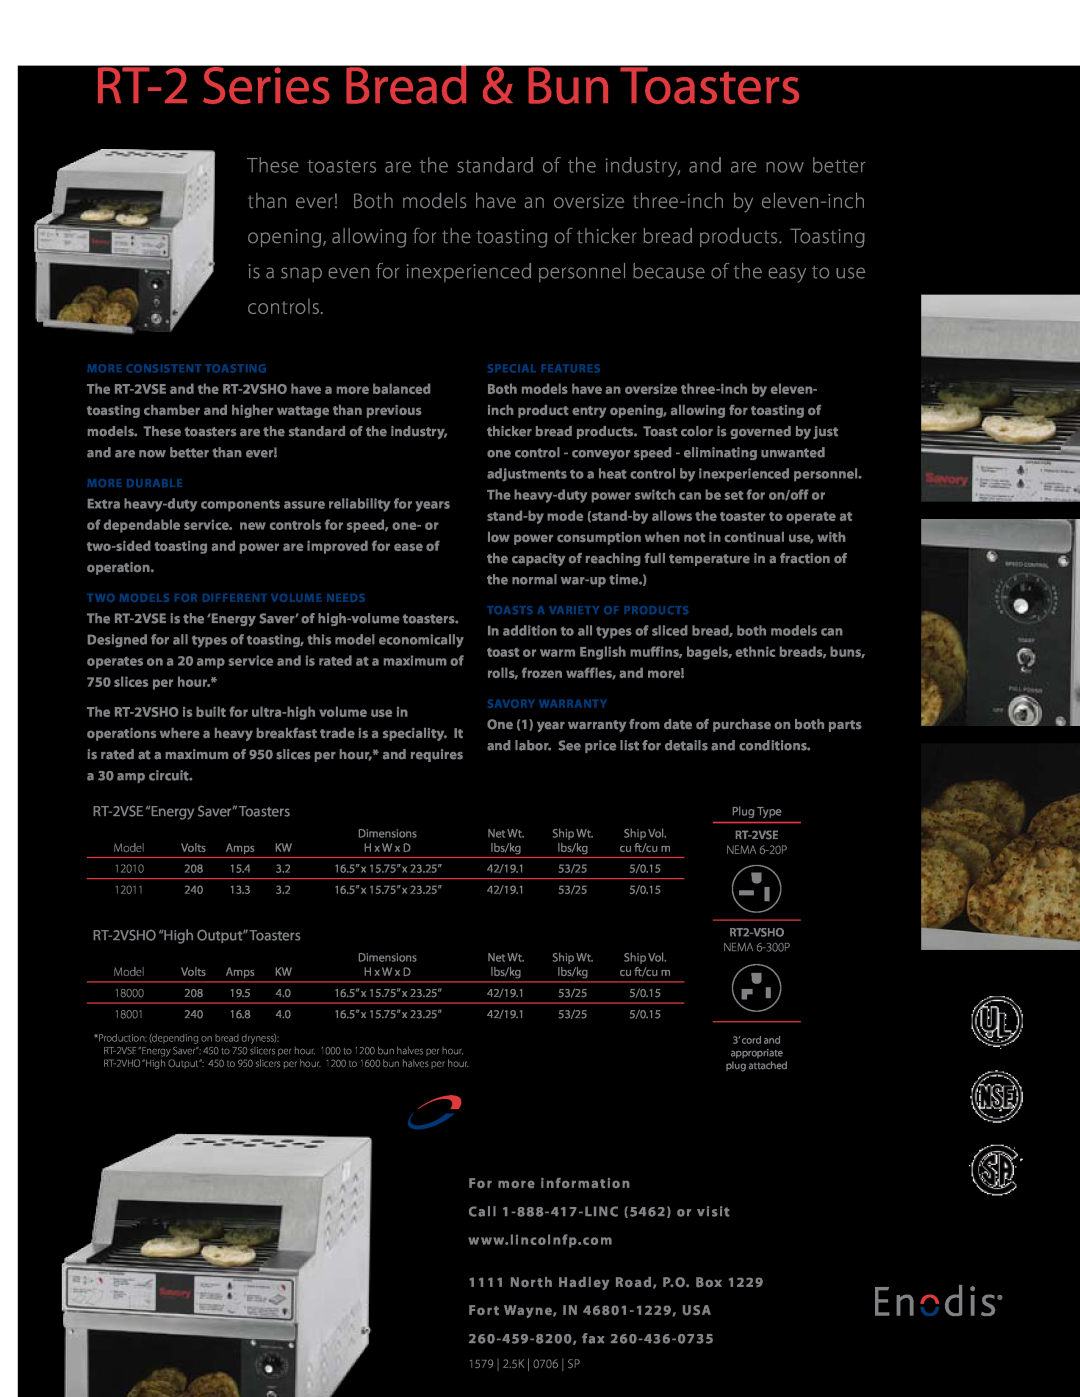 Merco Savory RT-2 Series RT-2Series Bread & Bun Toasters, RT-2VSE“Energy Saver”Toasters, RT-2VSHO“High Output”Toasters 